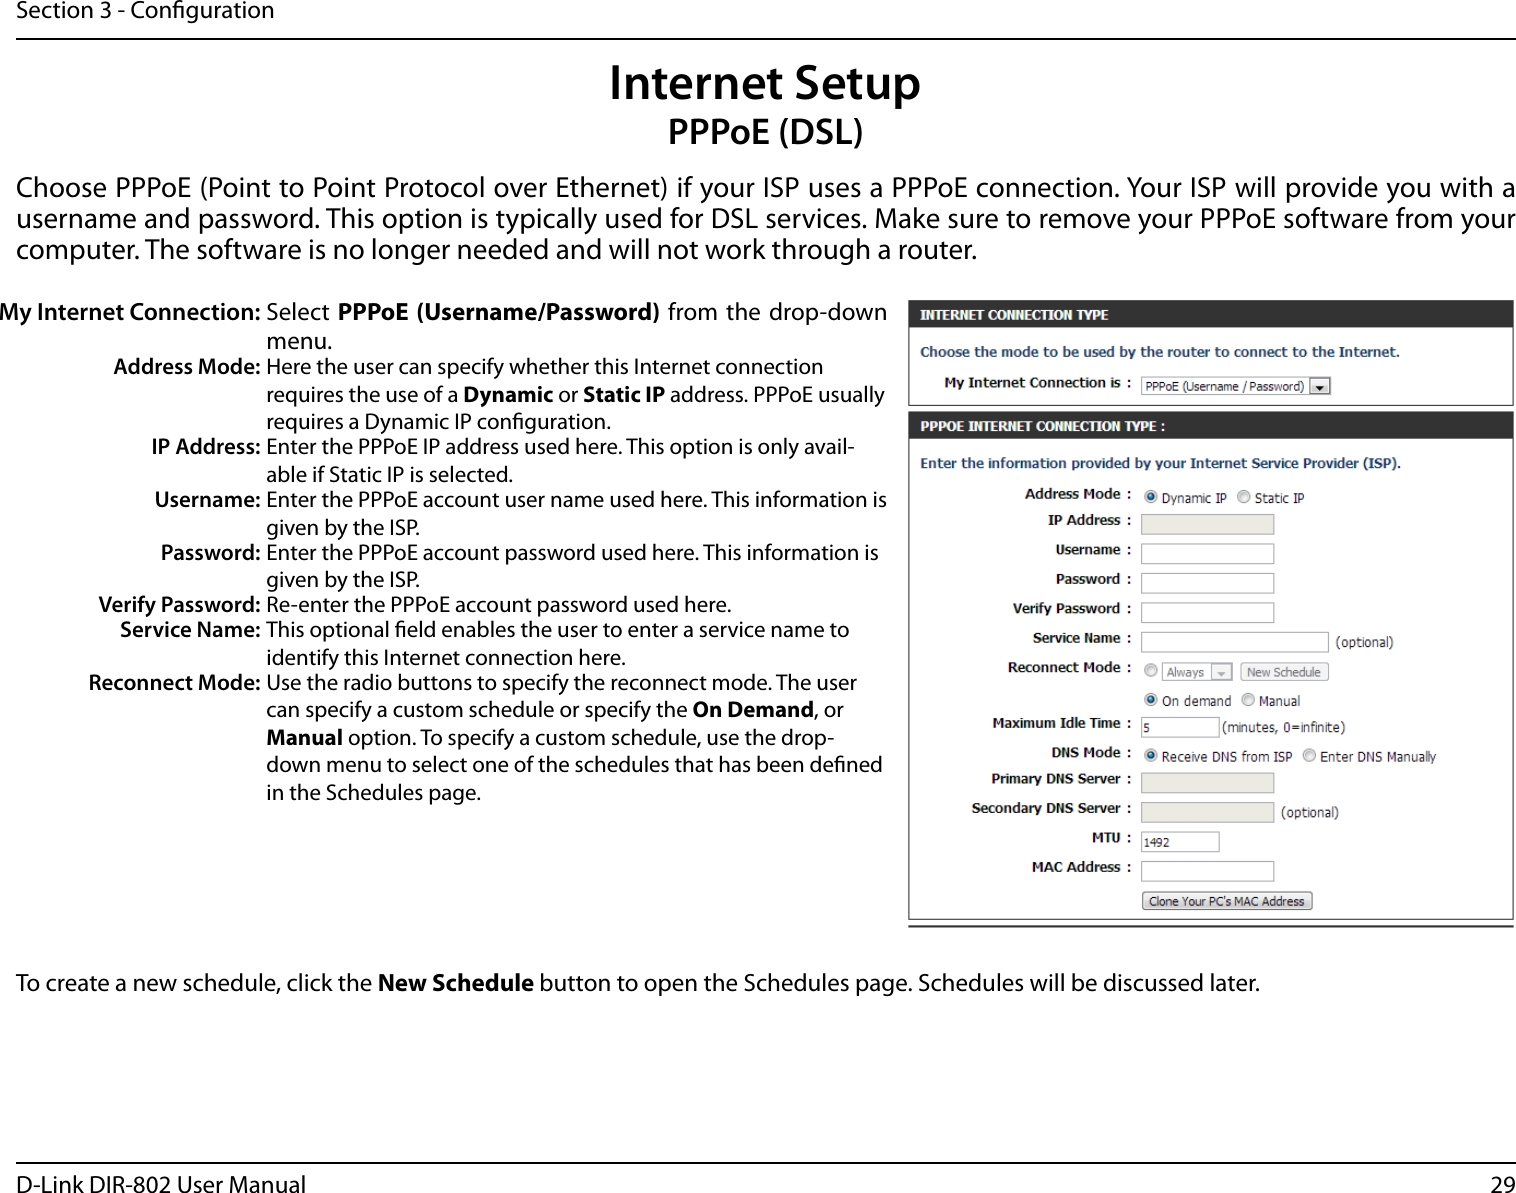 29D-Link DIR-802 User ManualSection 3 - CongurationInternet SetupPPPoE (DSL)Choose PPPoE (Point to Point Protocol over Ethernet) if your ISP uses a PPPoE connection. Your ISP will provide you with a username and password. This option is typically used for DSL services. Make sure to remove your PPPoE software from your computer. The software is no longer needed and will not work through a router.My Internet Connection: Select PPPoE (Username/Password) from  the  drop-down menu.Address Mode: Here the user can specify whether this Internet connection requires the use of a Dynamic or Static IP address. PPPoE usually requires a Dynamic IP conguration.IP Address: Enter the PPPoE IP address used here. This option is only avail-able if Static IP is selected.Username: Enter the PPPoE account user name used here. This information is given by the ISP.Password: Enter the PPPoE account password used here. This information is given by the ISP.Verify Password: Re-enter the PPPoE account password used here.Service Name: This optional eld enables the user to enter a service name to identify this Internet connection here.Reconnect Mode: Use the radio buttons to specify the reconnect mode. The user can specify a custom schedule or specify the On Demand, or Manual option. To specify a custom schedule, use the drop-down menu to select one of the schedules that has been dened in the Schedules page.To create a new schedule, click the New Schedule button to open the Schedules page. Schedules will be discussed later.